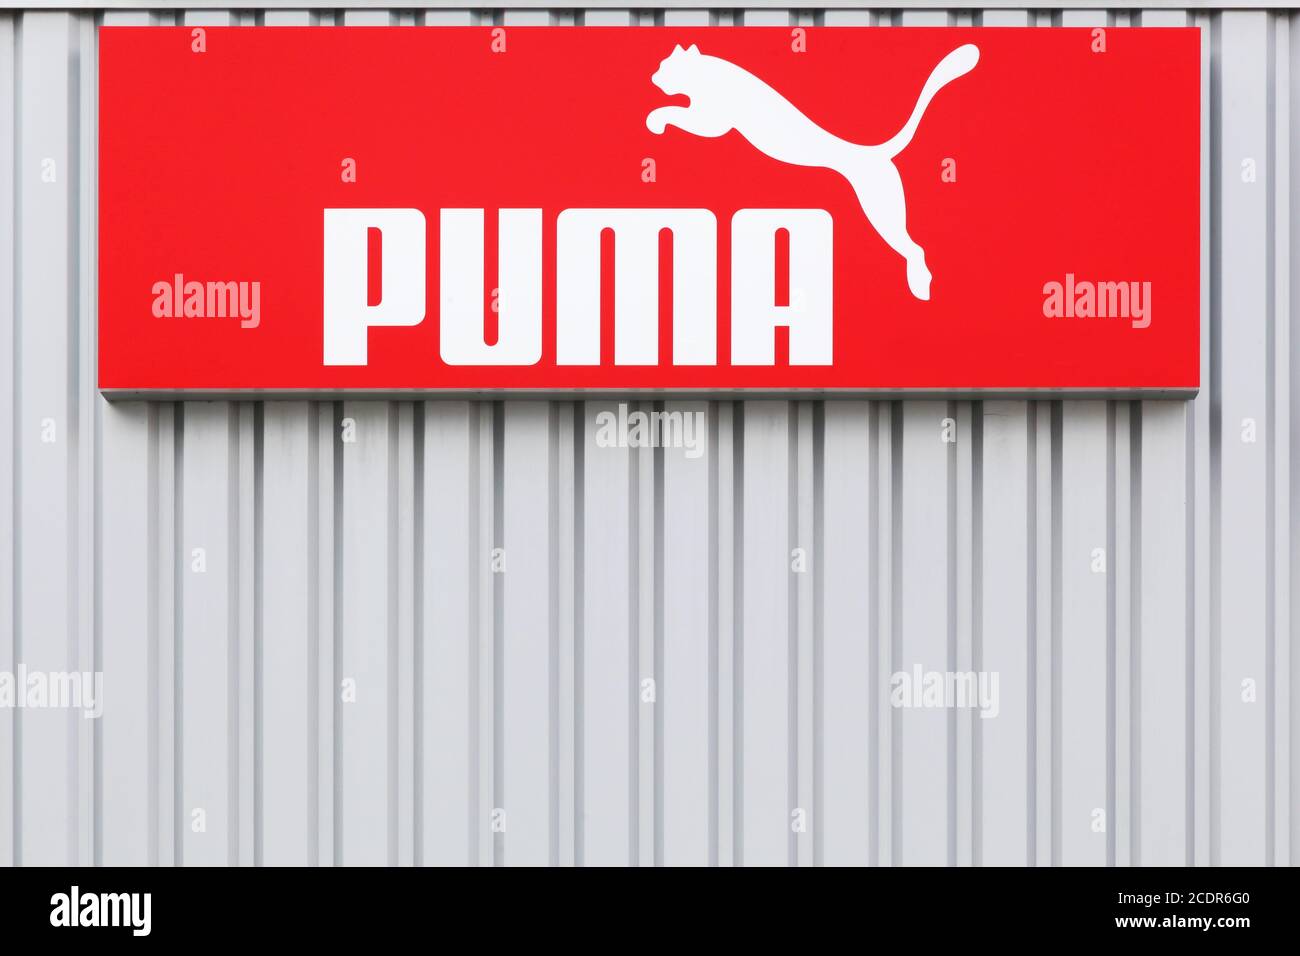 Bremen, Germany - July 2, 2017: Puma logo on a wall. Puma is a major german multinational company that produces athletic, casual footwear Stock Photo